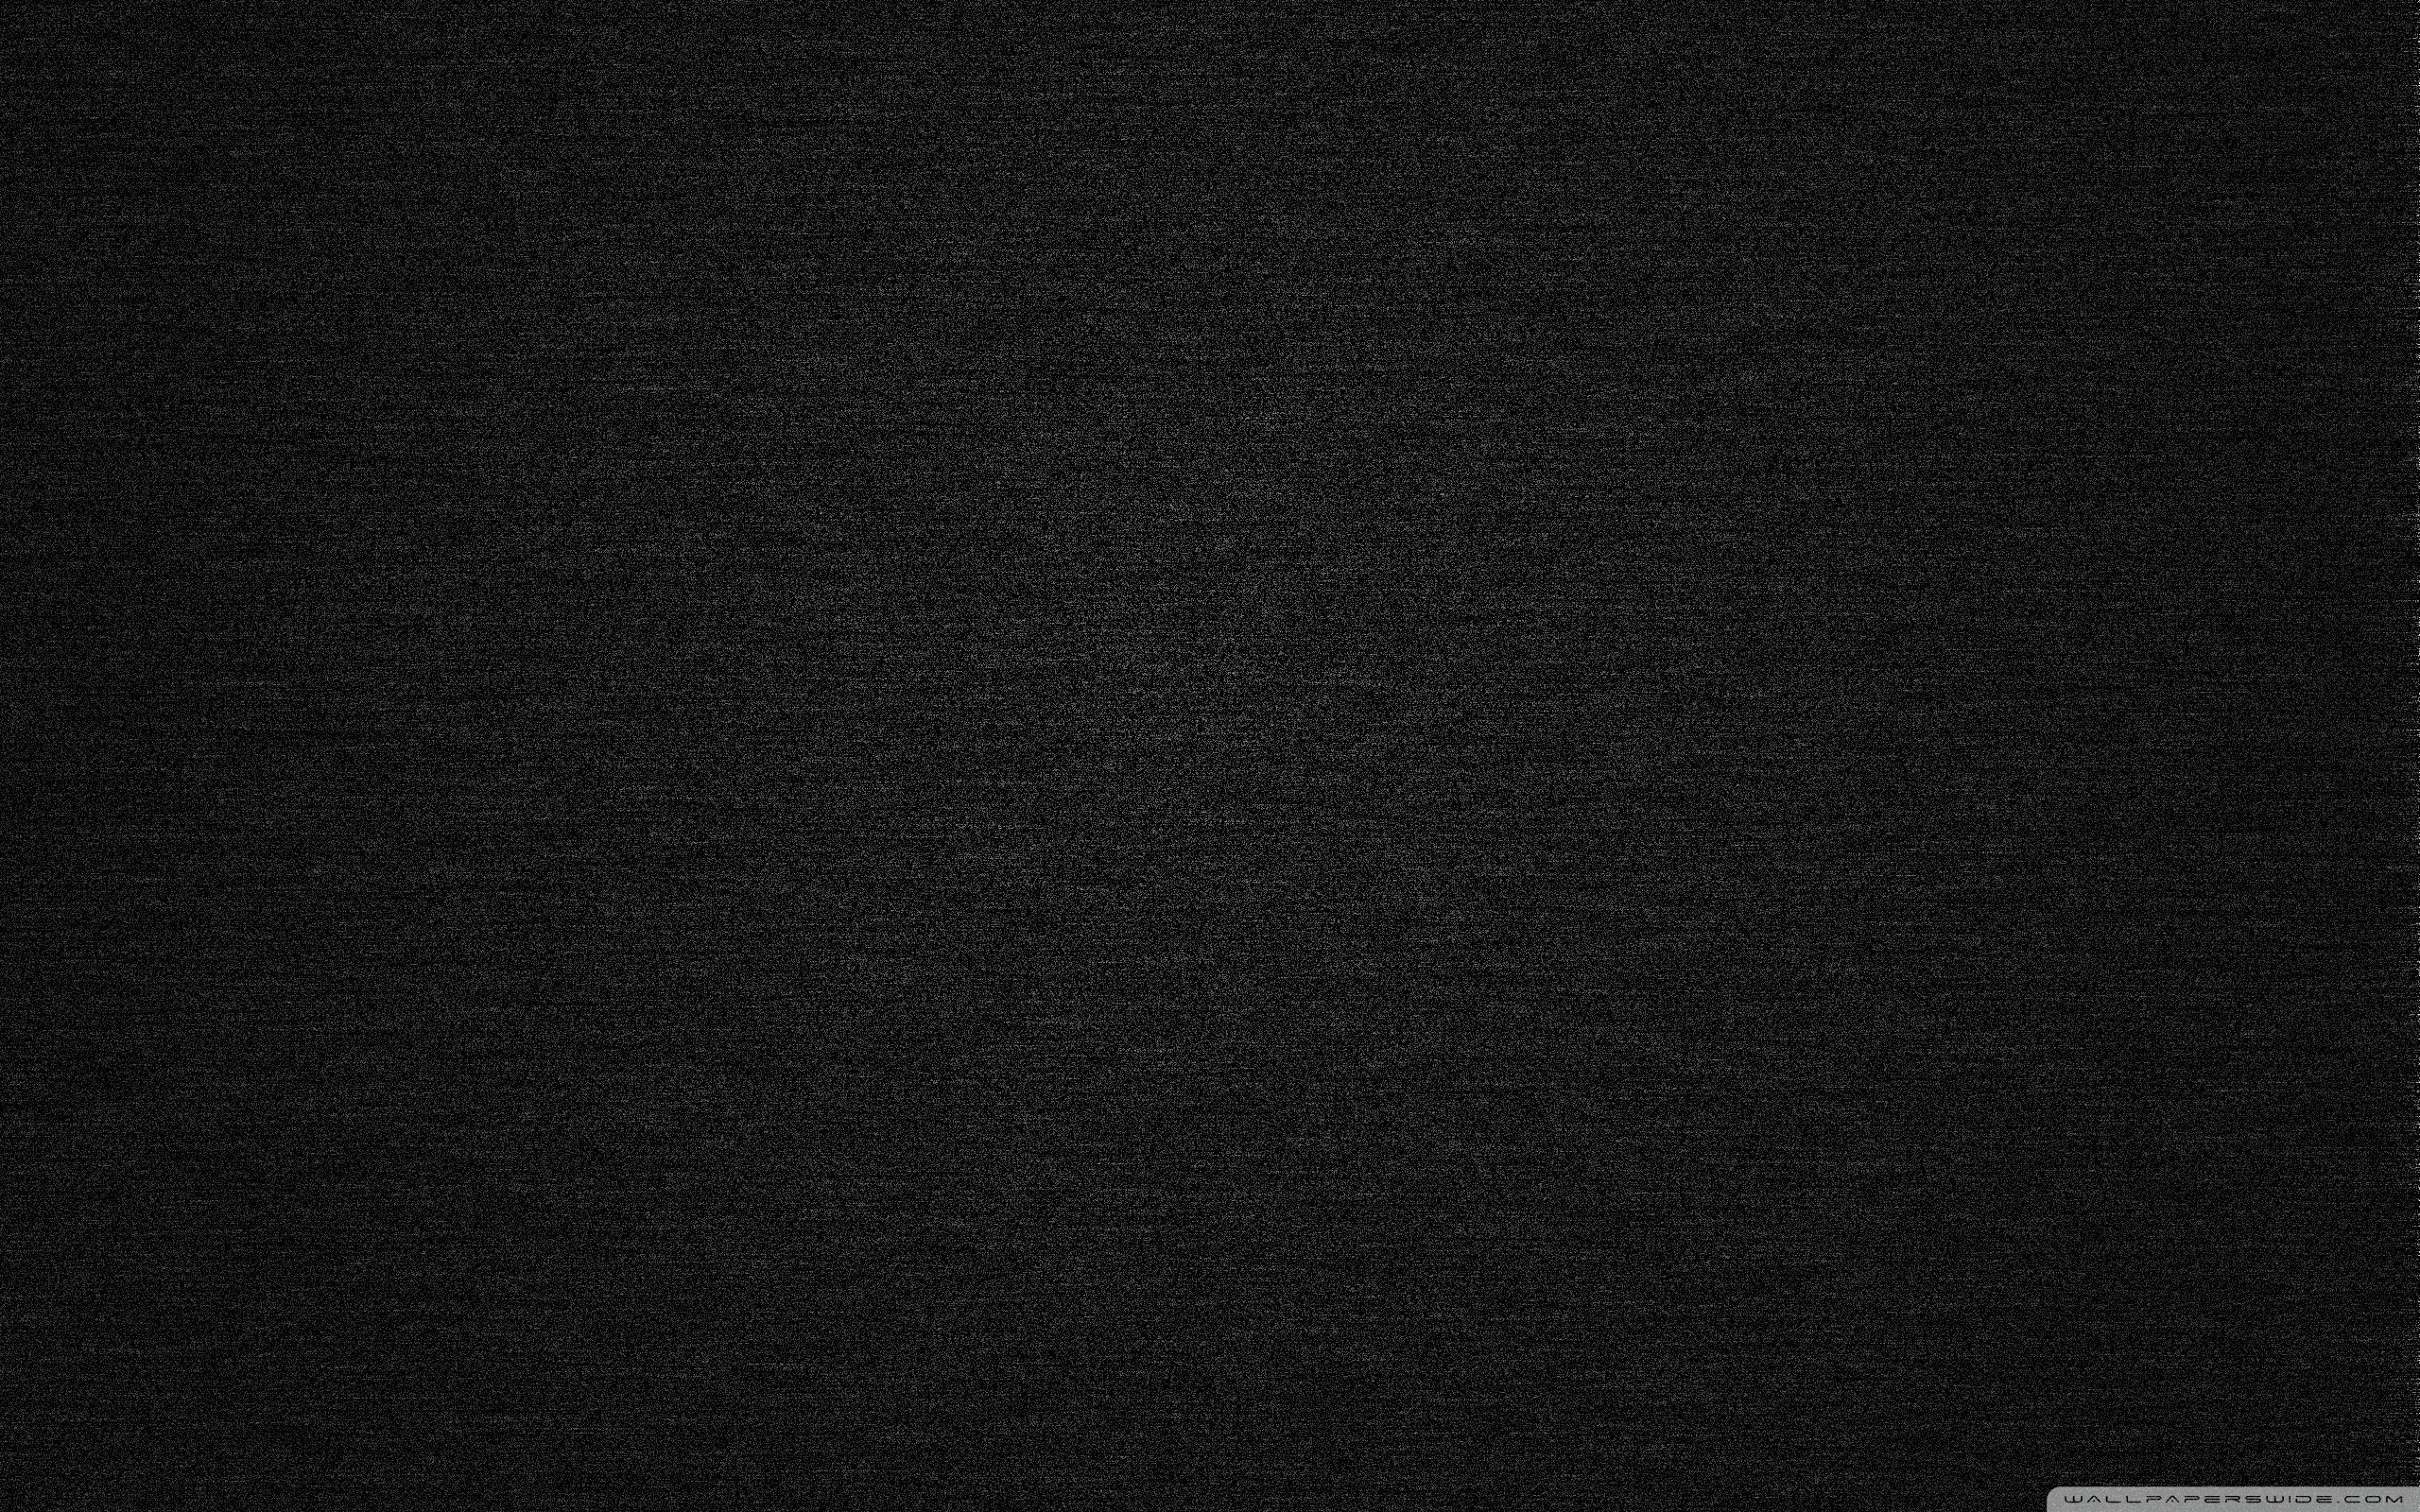 Black Noise Wallpaper 2560x1600 Wallpapers Hd Desktop And Mobile Backgrounds